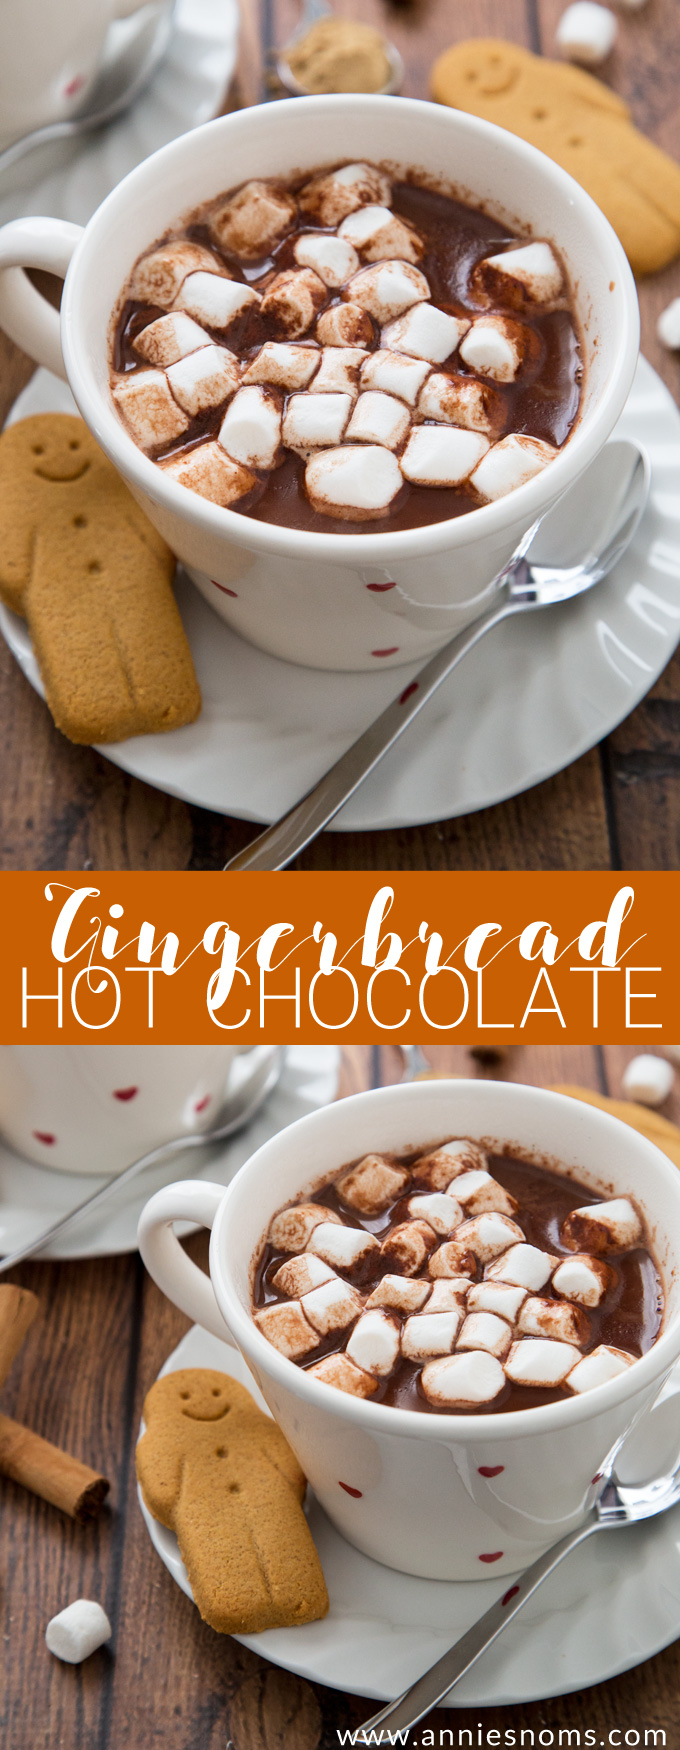 Gingerbread Hot Chocolate - Annie's Noms